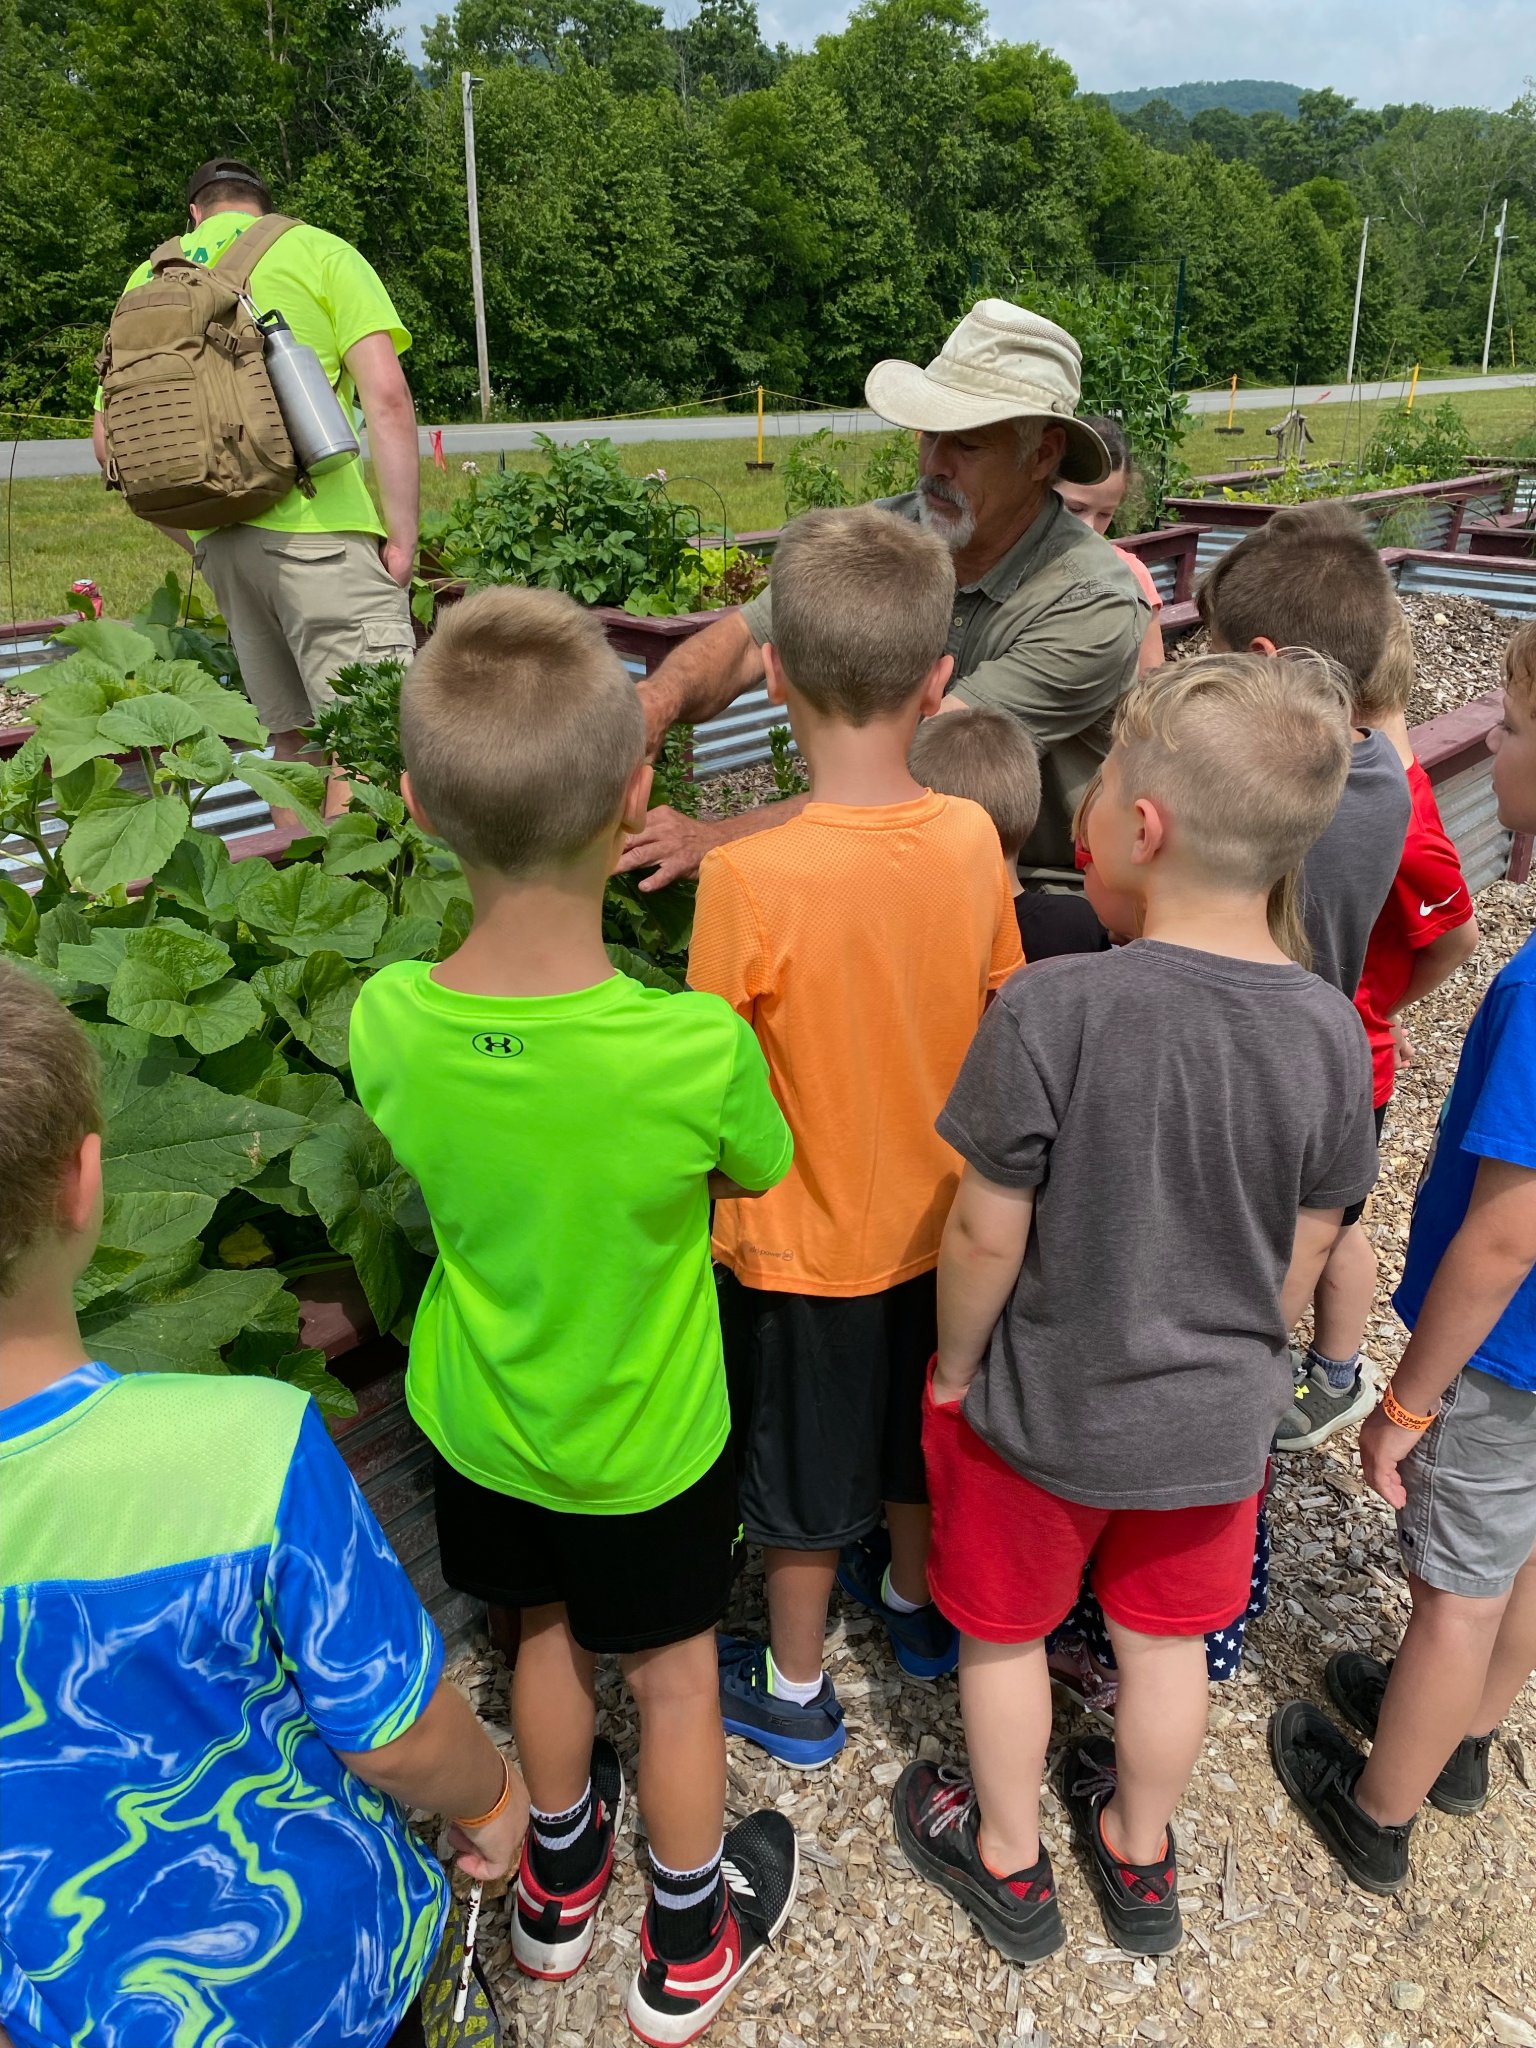 Children gather to view a farmer working with plants.